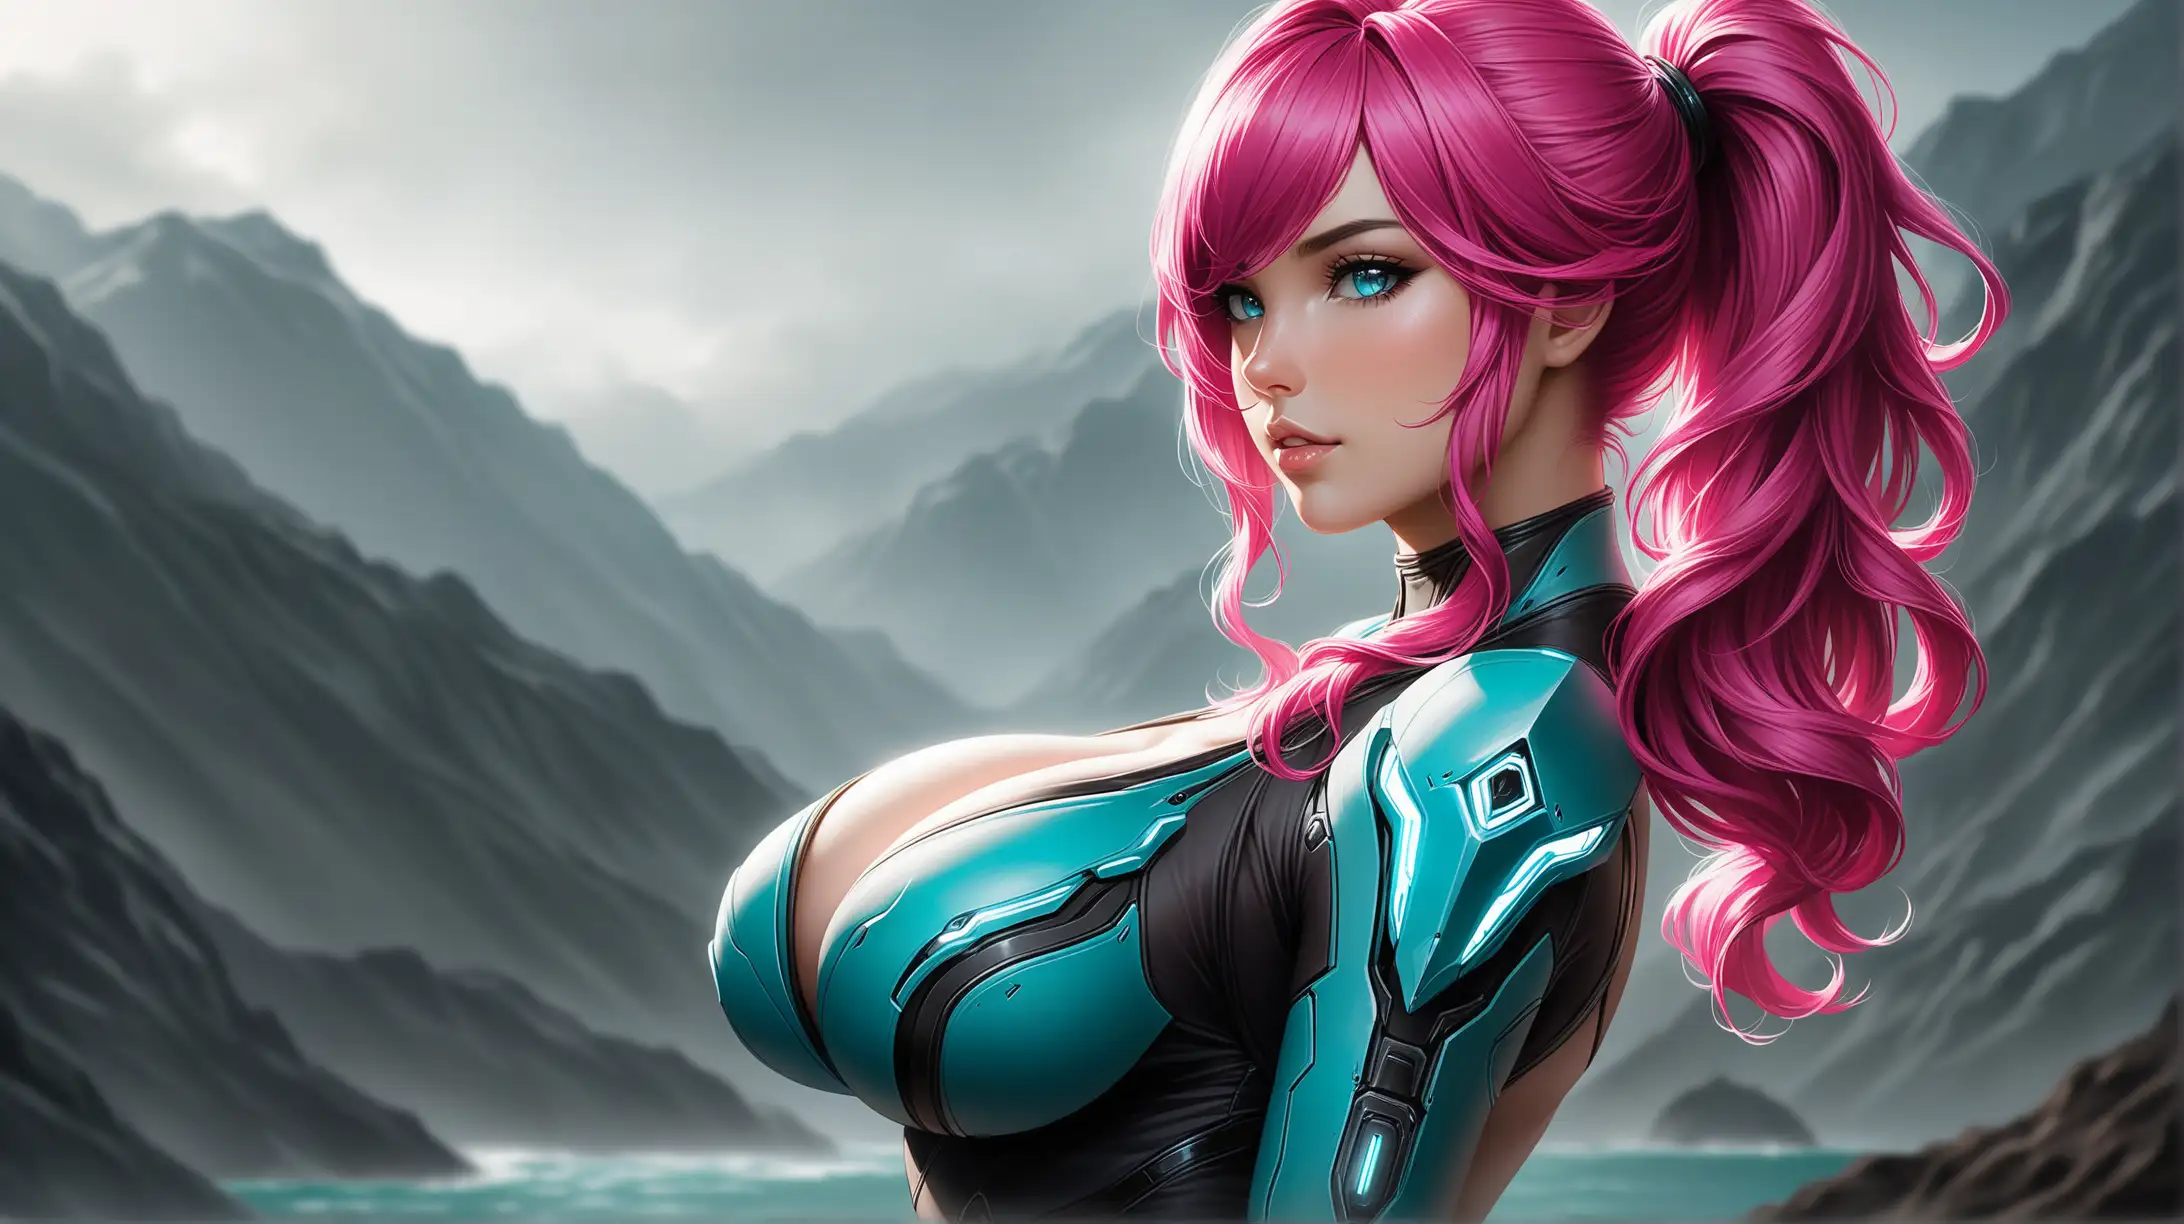 Draw a woman, curly voluminous hot pink hair, pony tail, cyan eyes, busty figure, high quality, realistic, upper body shot, natural lighting, outdoors, overcast, outfit inspired from Warframe, seductive pose, cleavage, loving gaze